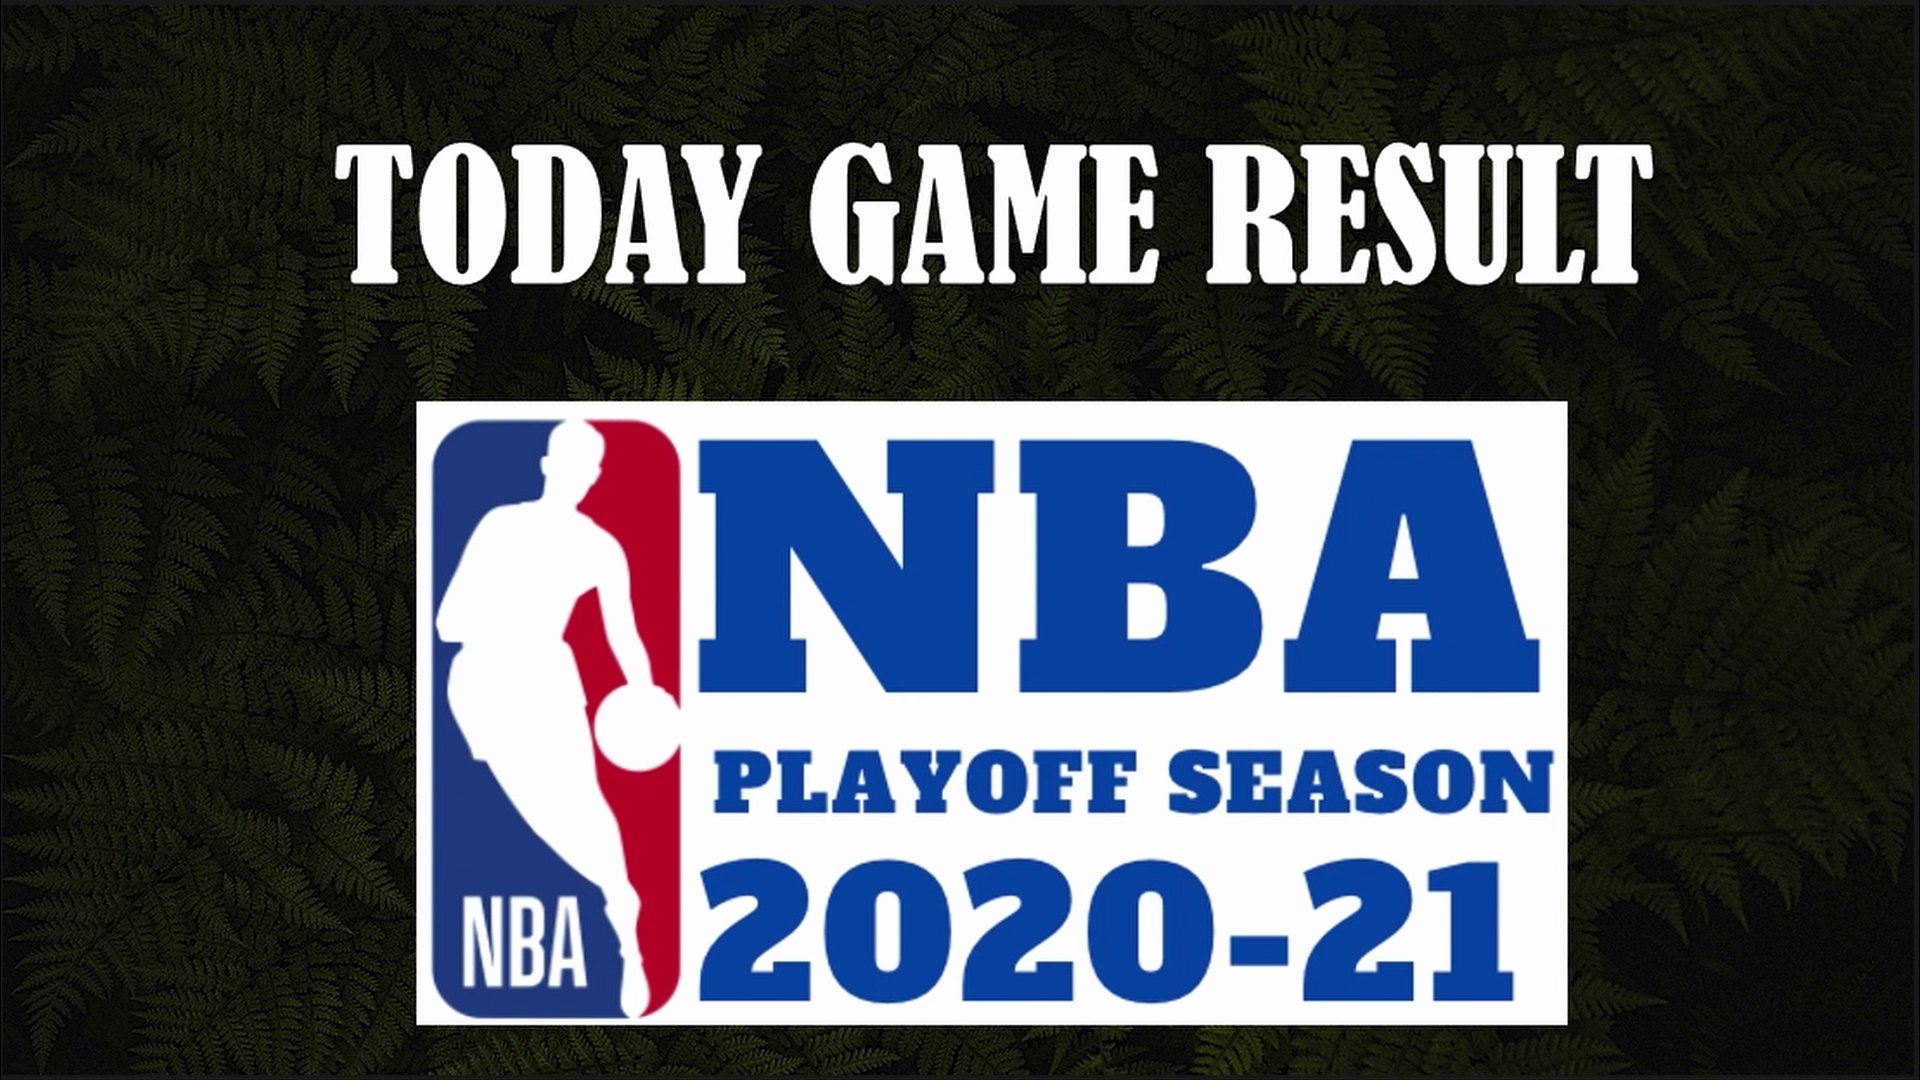 NBA GAMES RESULT TODAY and NBA TEAM STANDING TODAY JUNE 18 2021 NBA PLAYOFF SEASON 2020-21